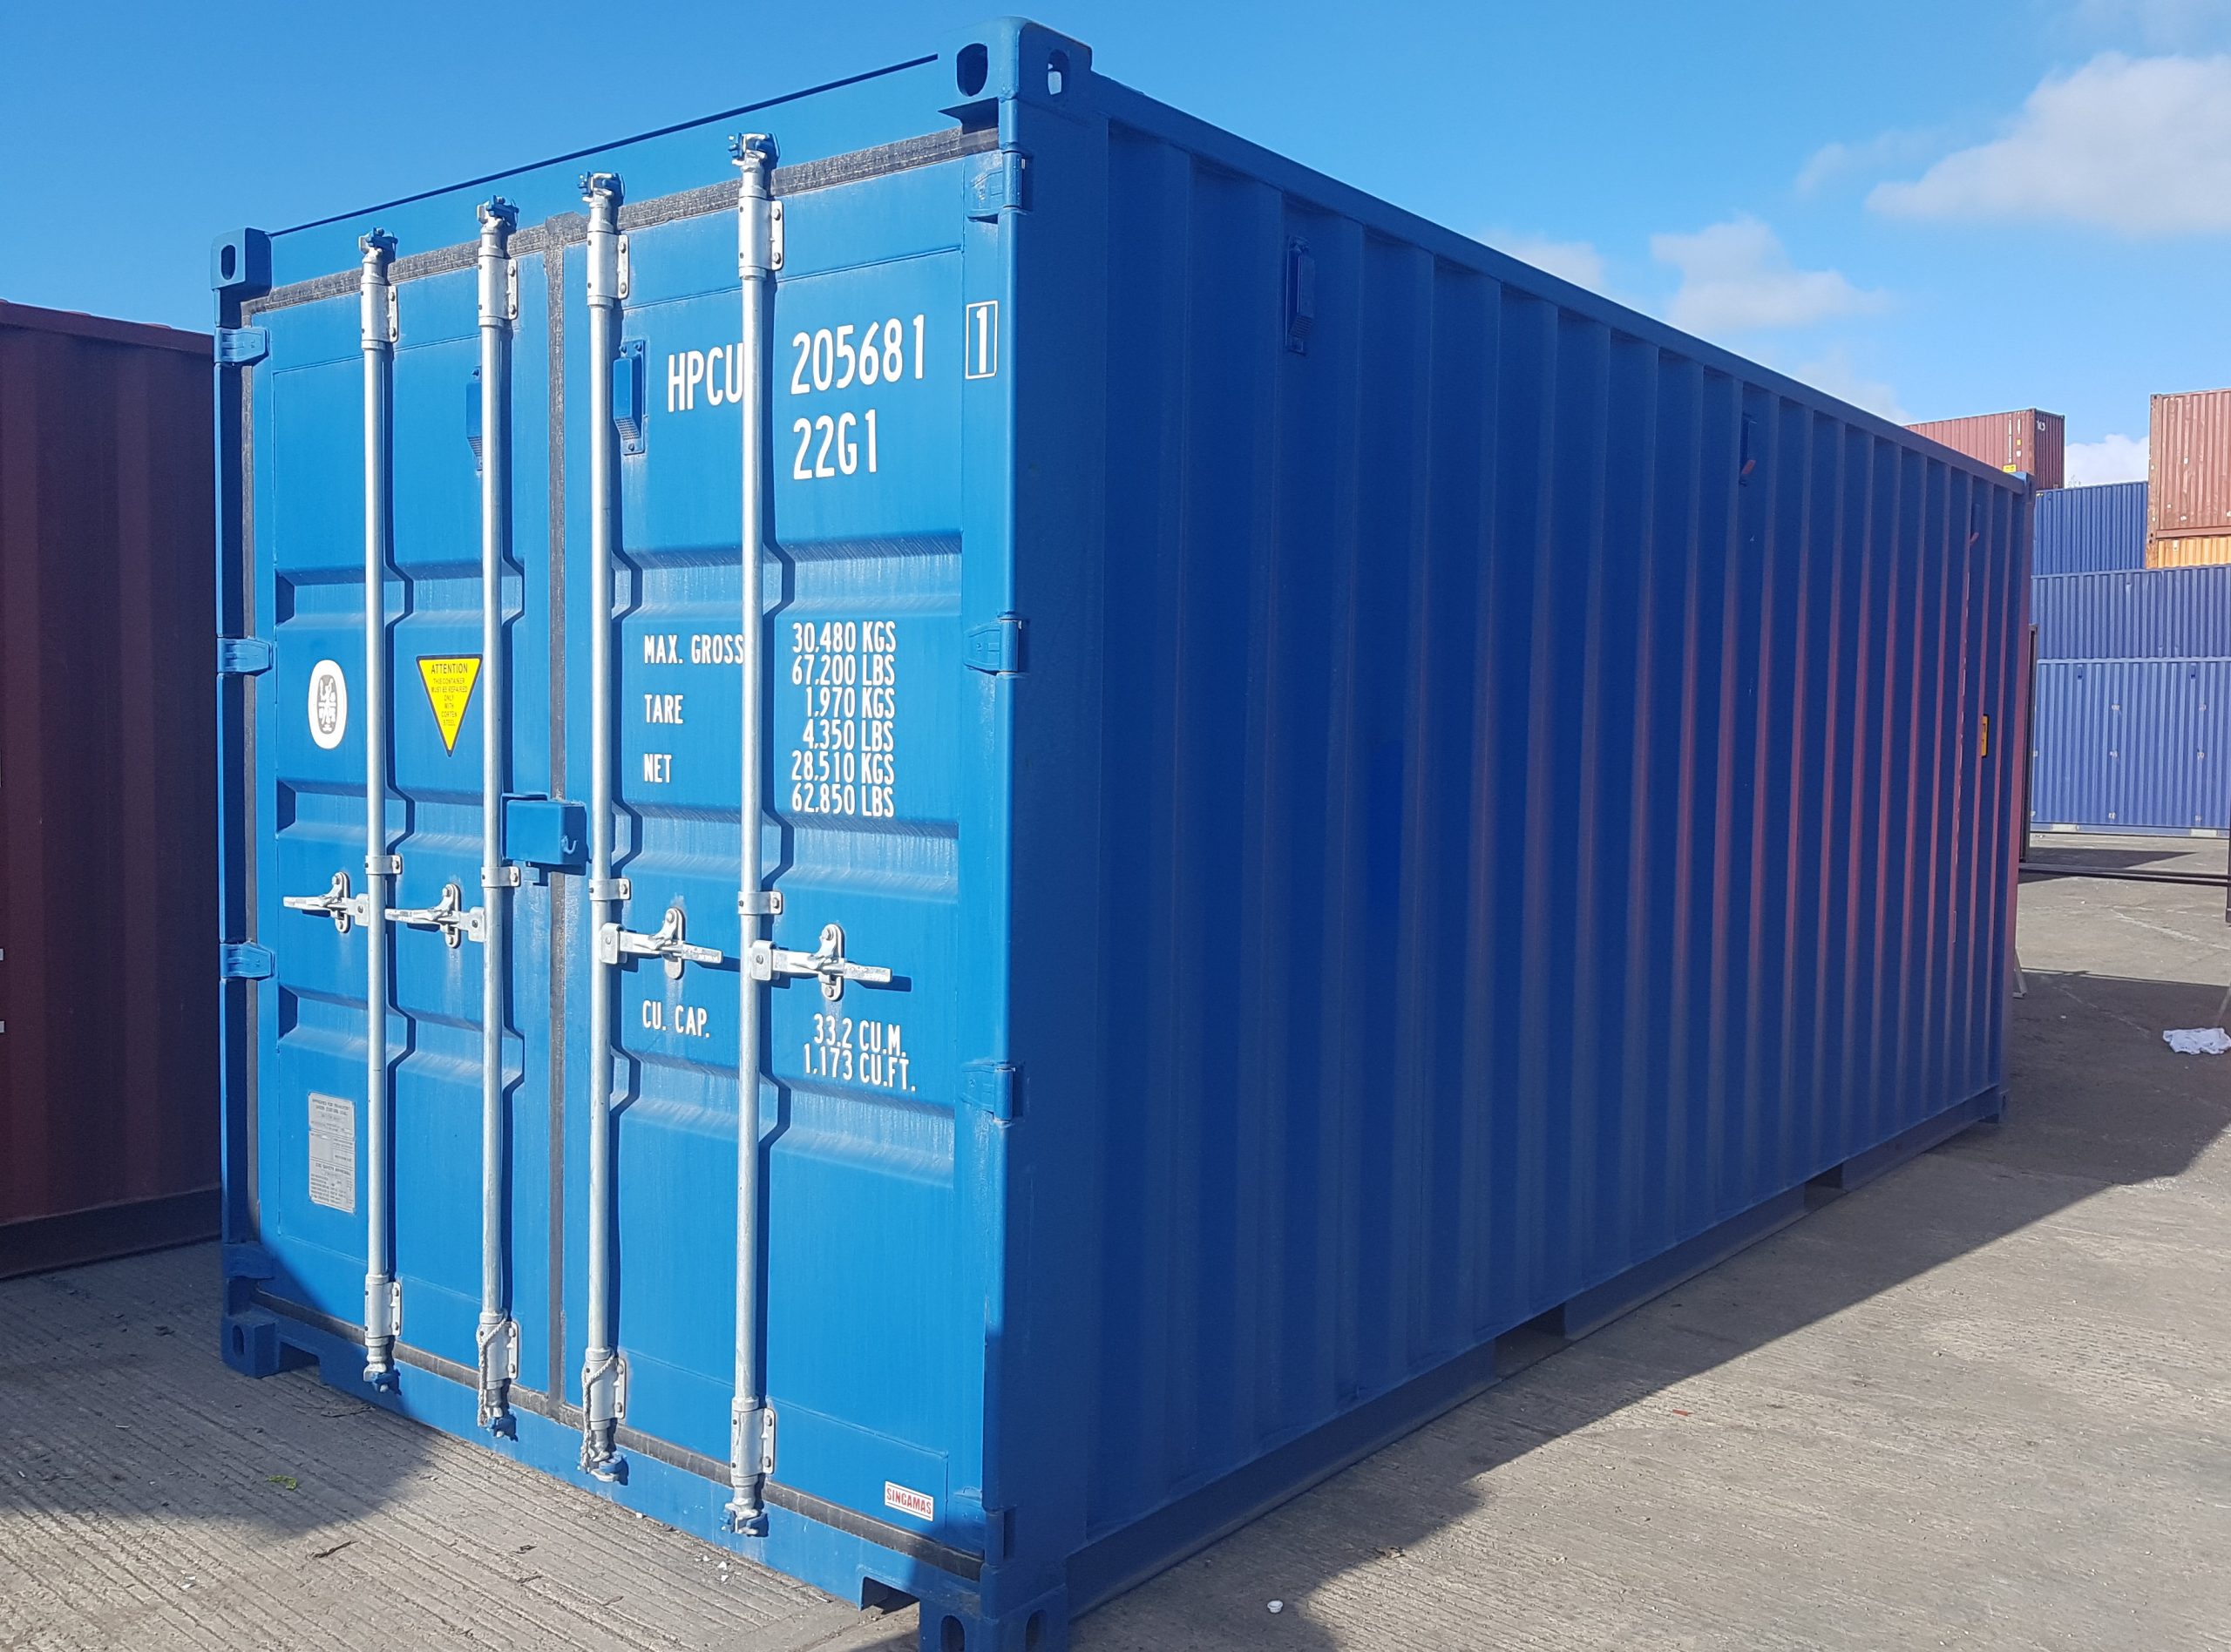 A blue shipping container outside on a clear, sunny day.